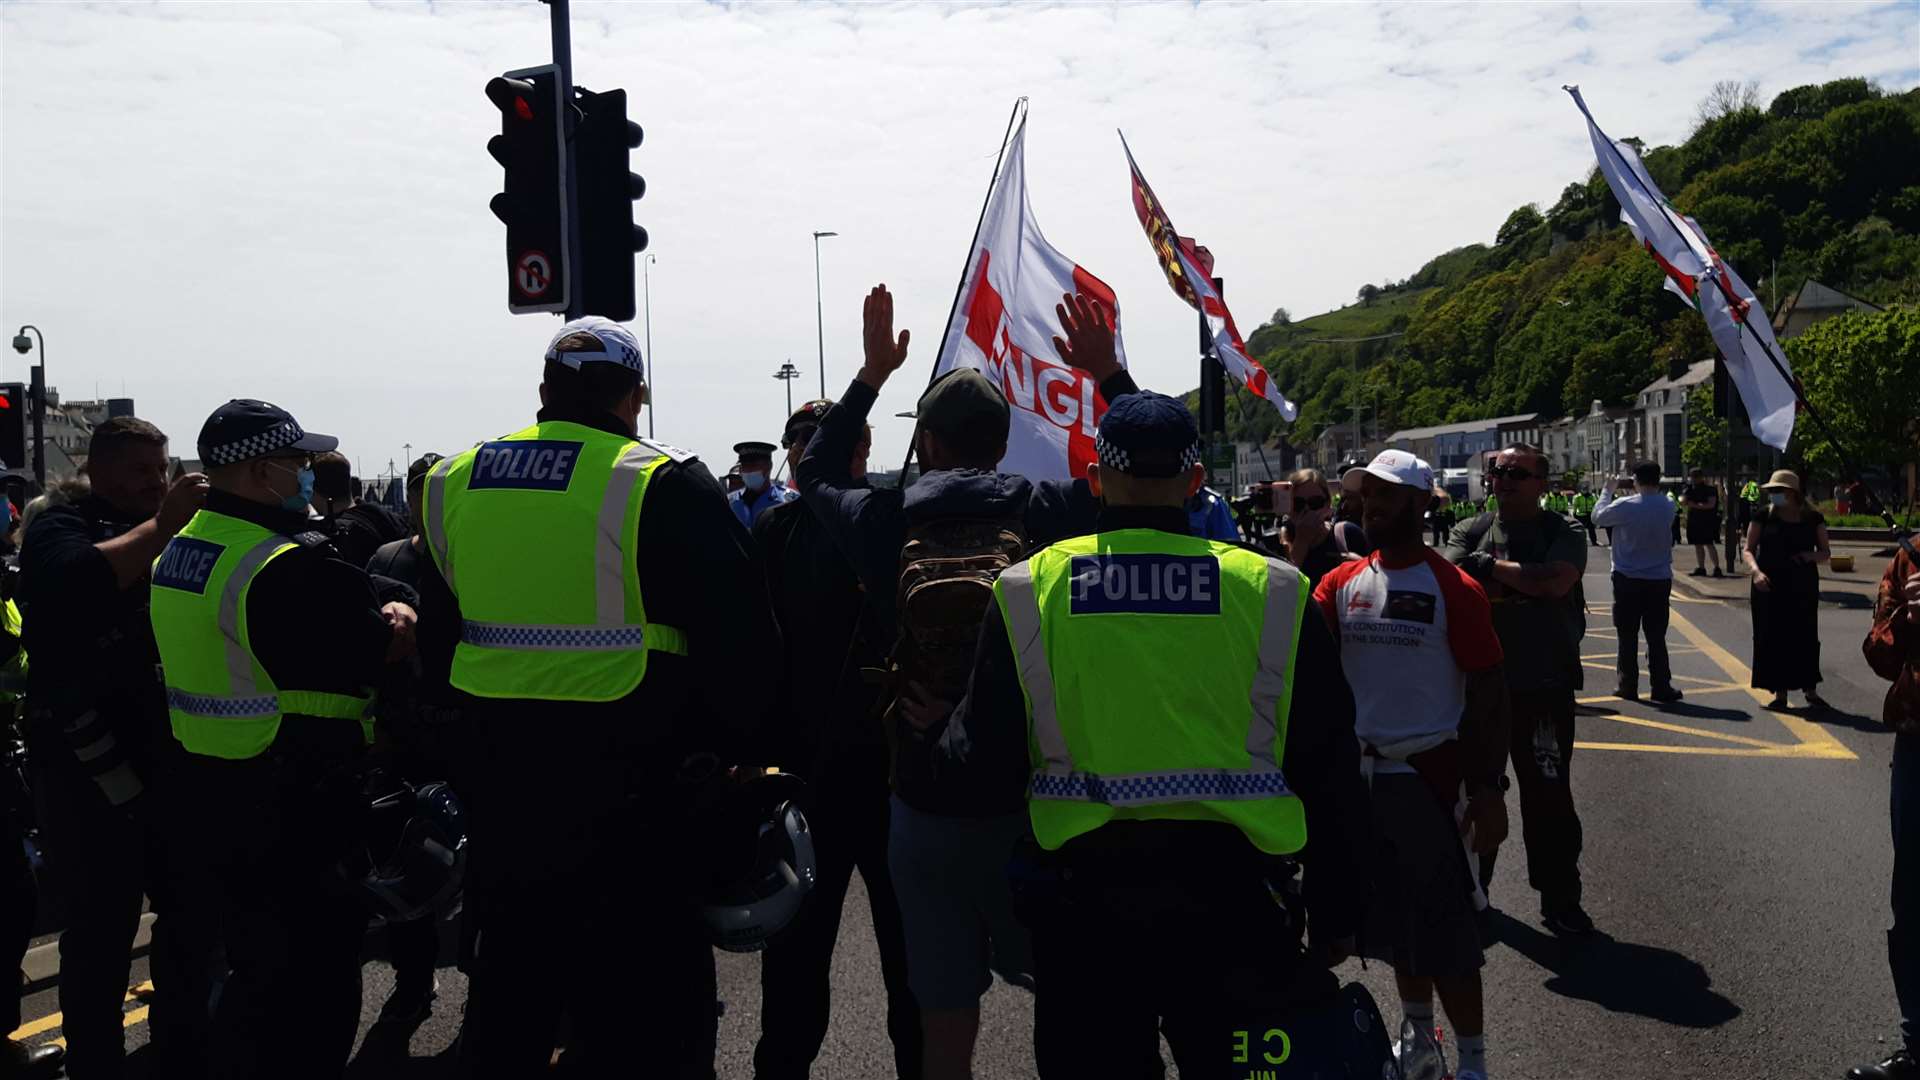 The demonstration at Snargate Street on May 29. Picture: Sam Lennon